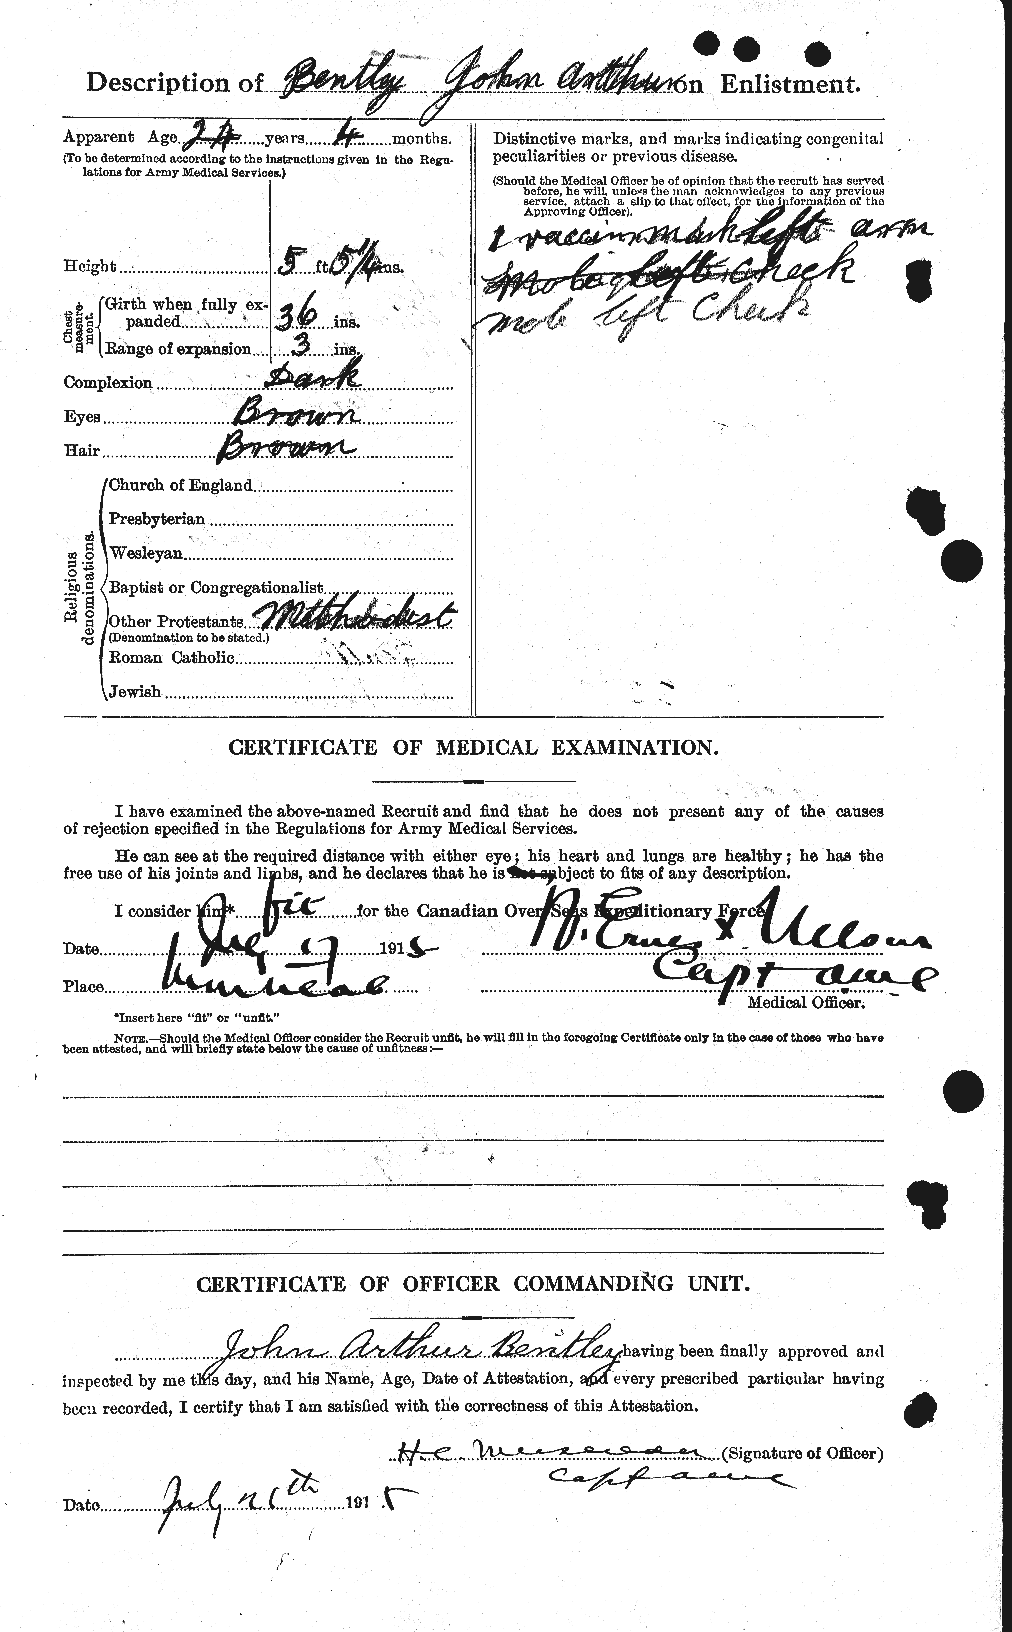 Personnel Records of the First World War - CEF 237877b